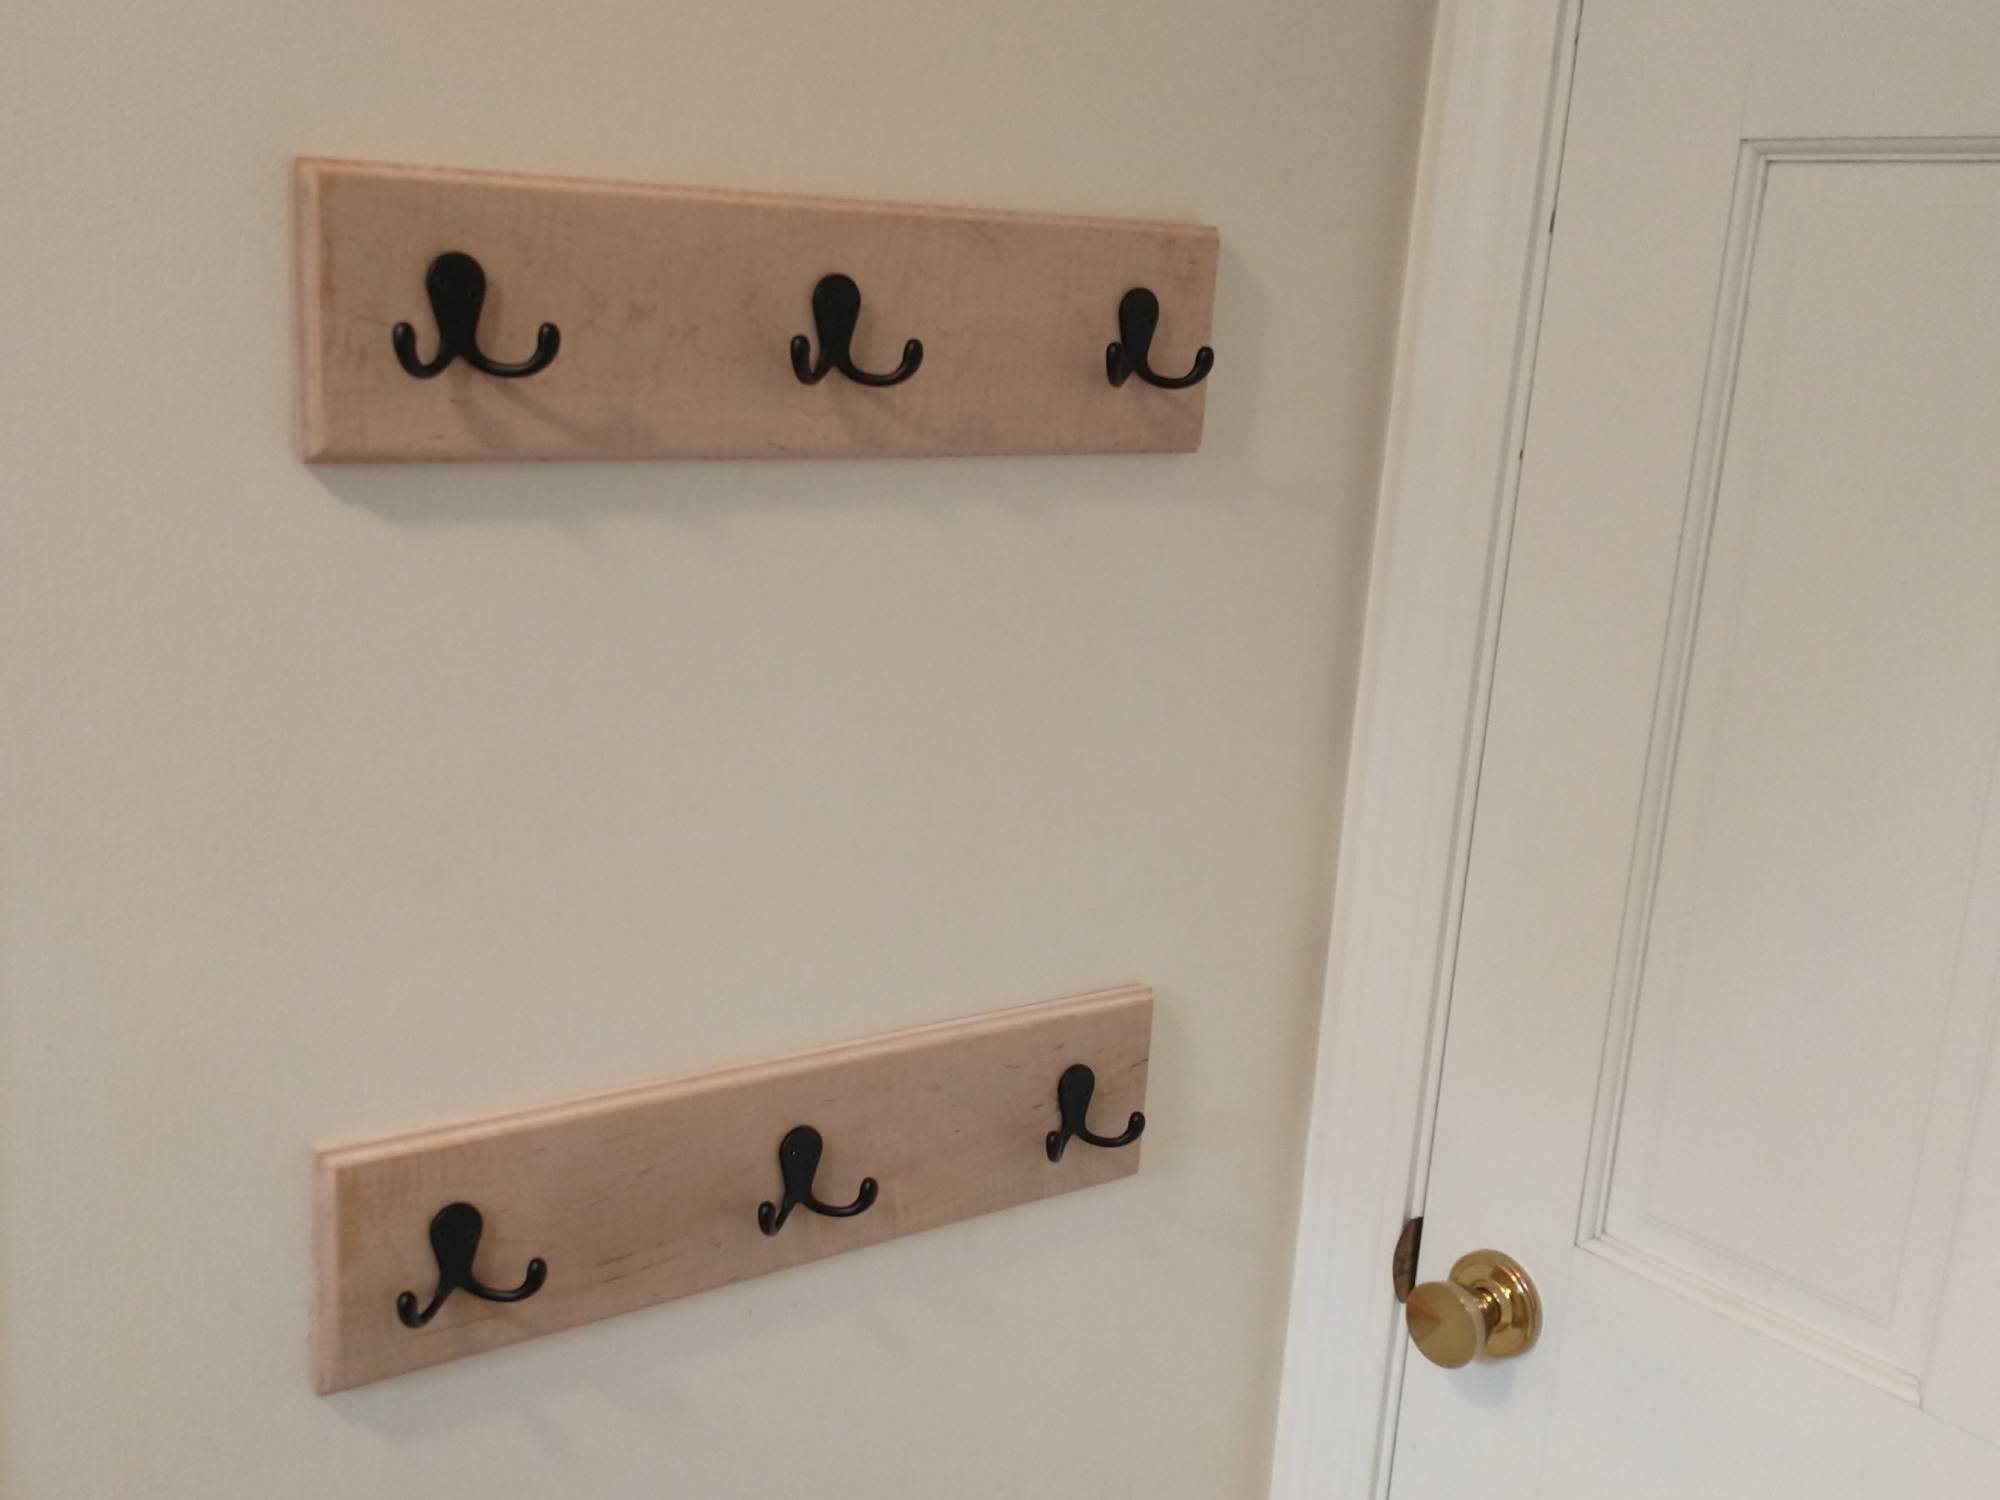 Custom coat hooks you can build in just a few hours